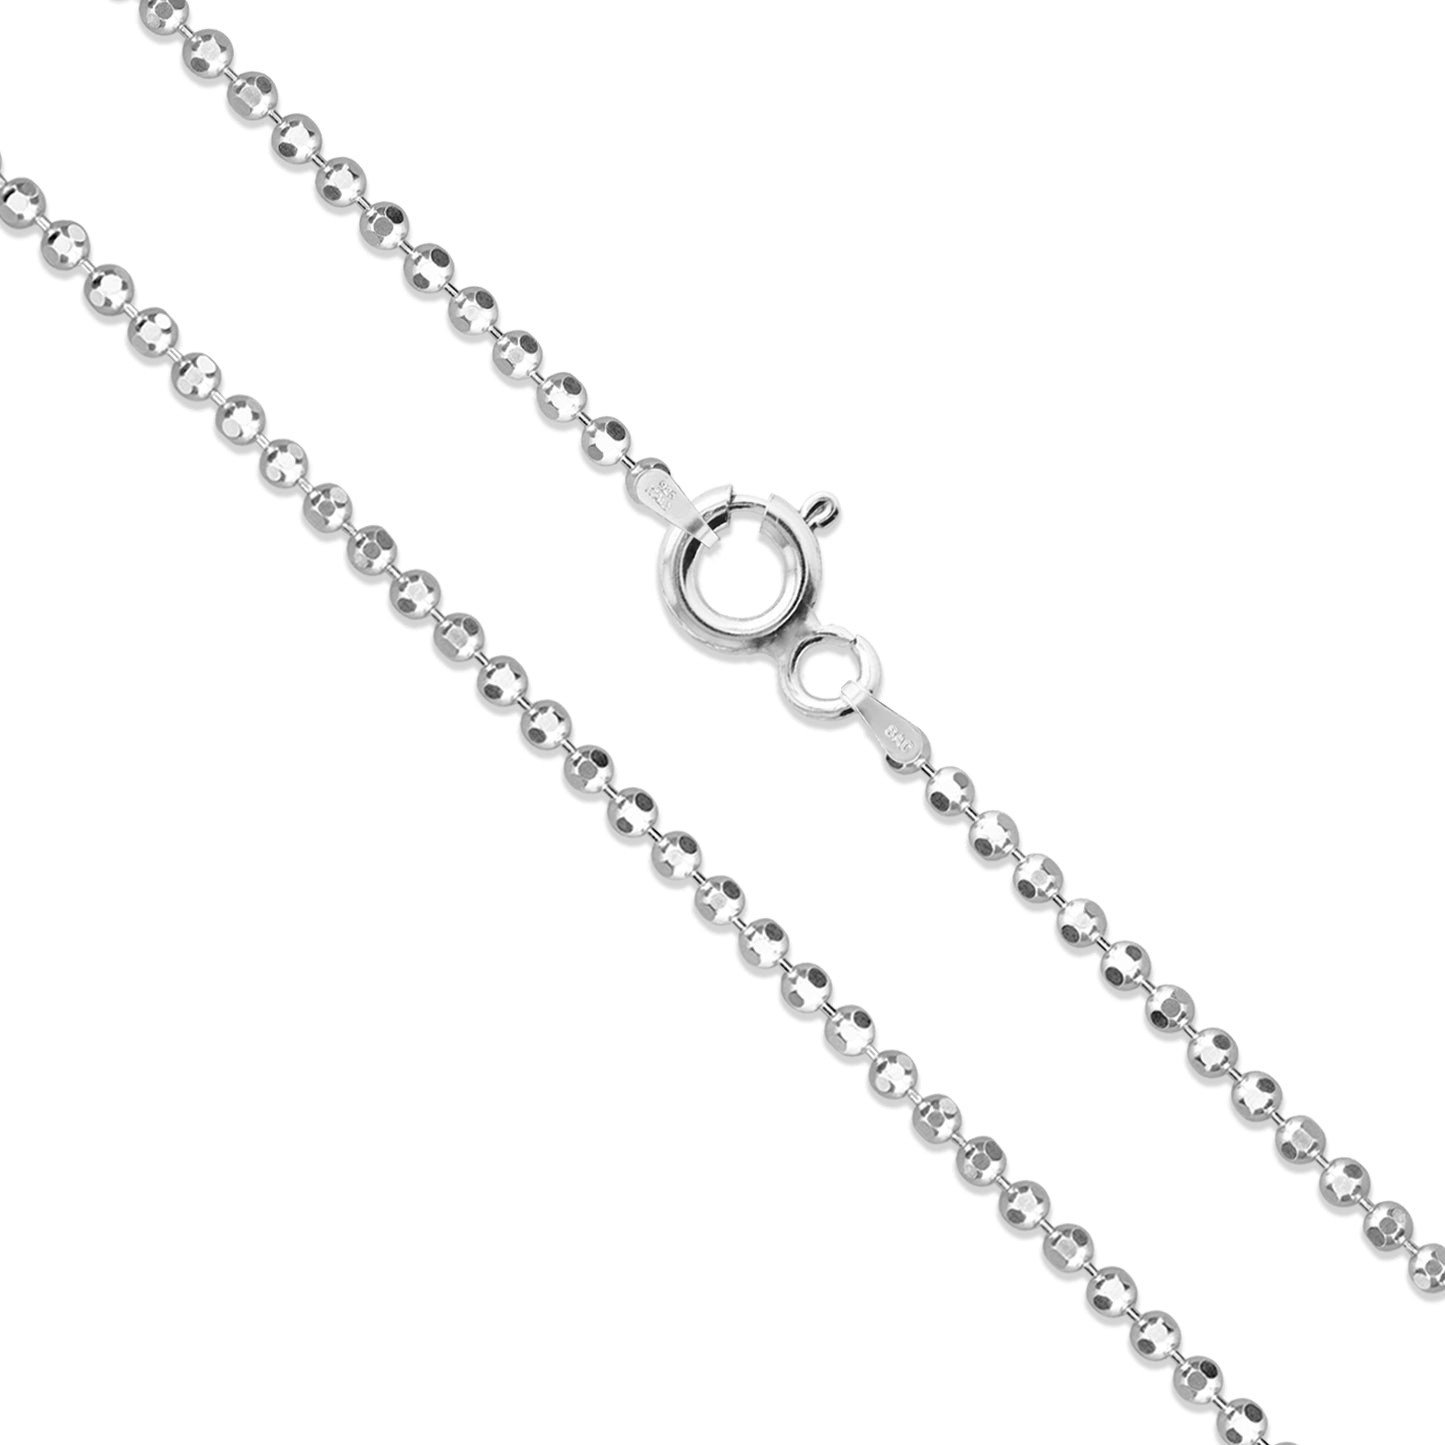 Sterling Silver Diamond-Cut Ball Bead Chain 1.5mm 925 Italy Dog Tag Necklace